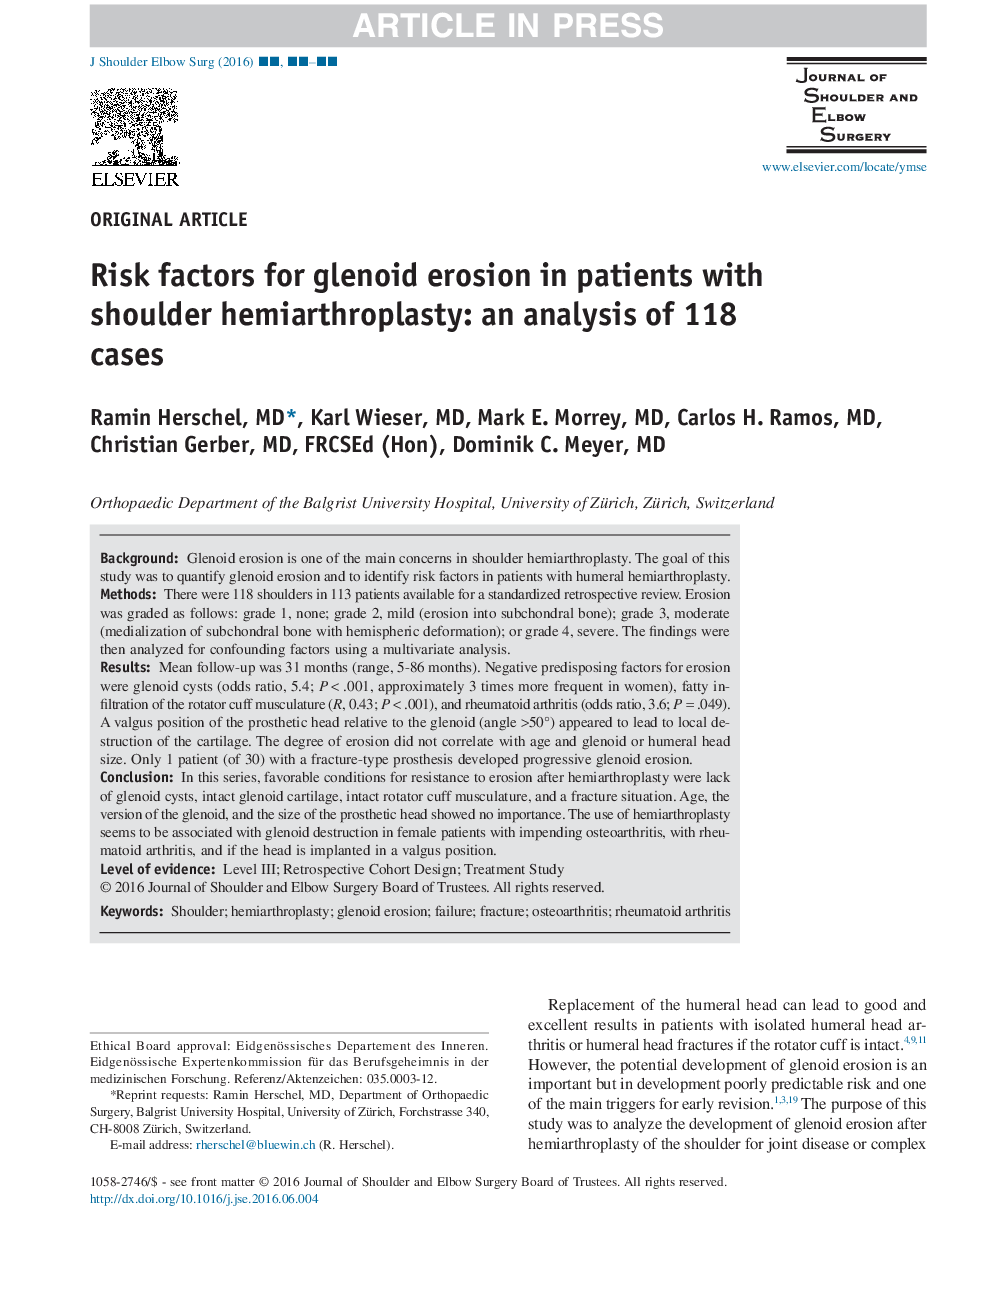 Risk factors for glenoid erosion in patients with shoulder hemiarthroplasty: an analysis of 118 cases